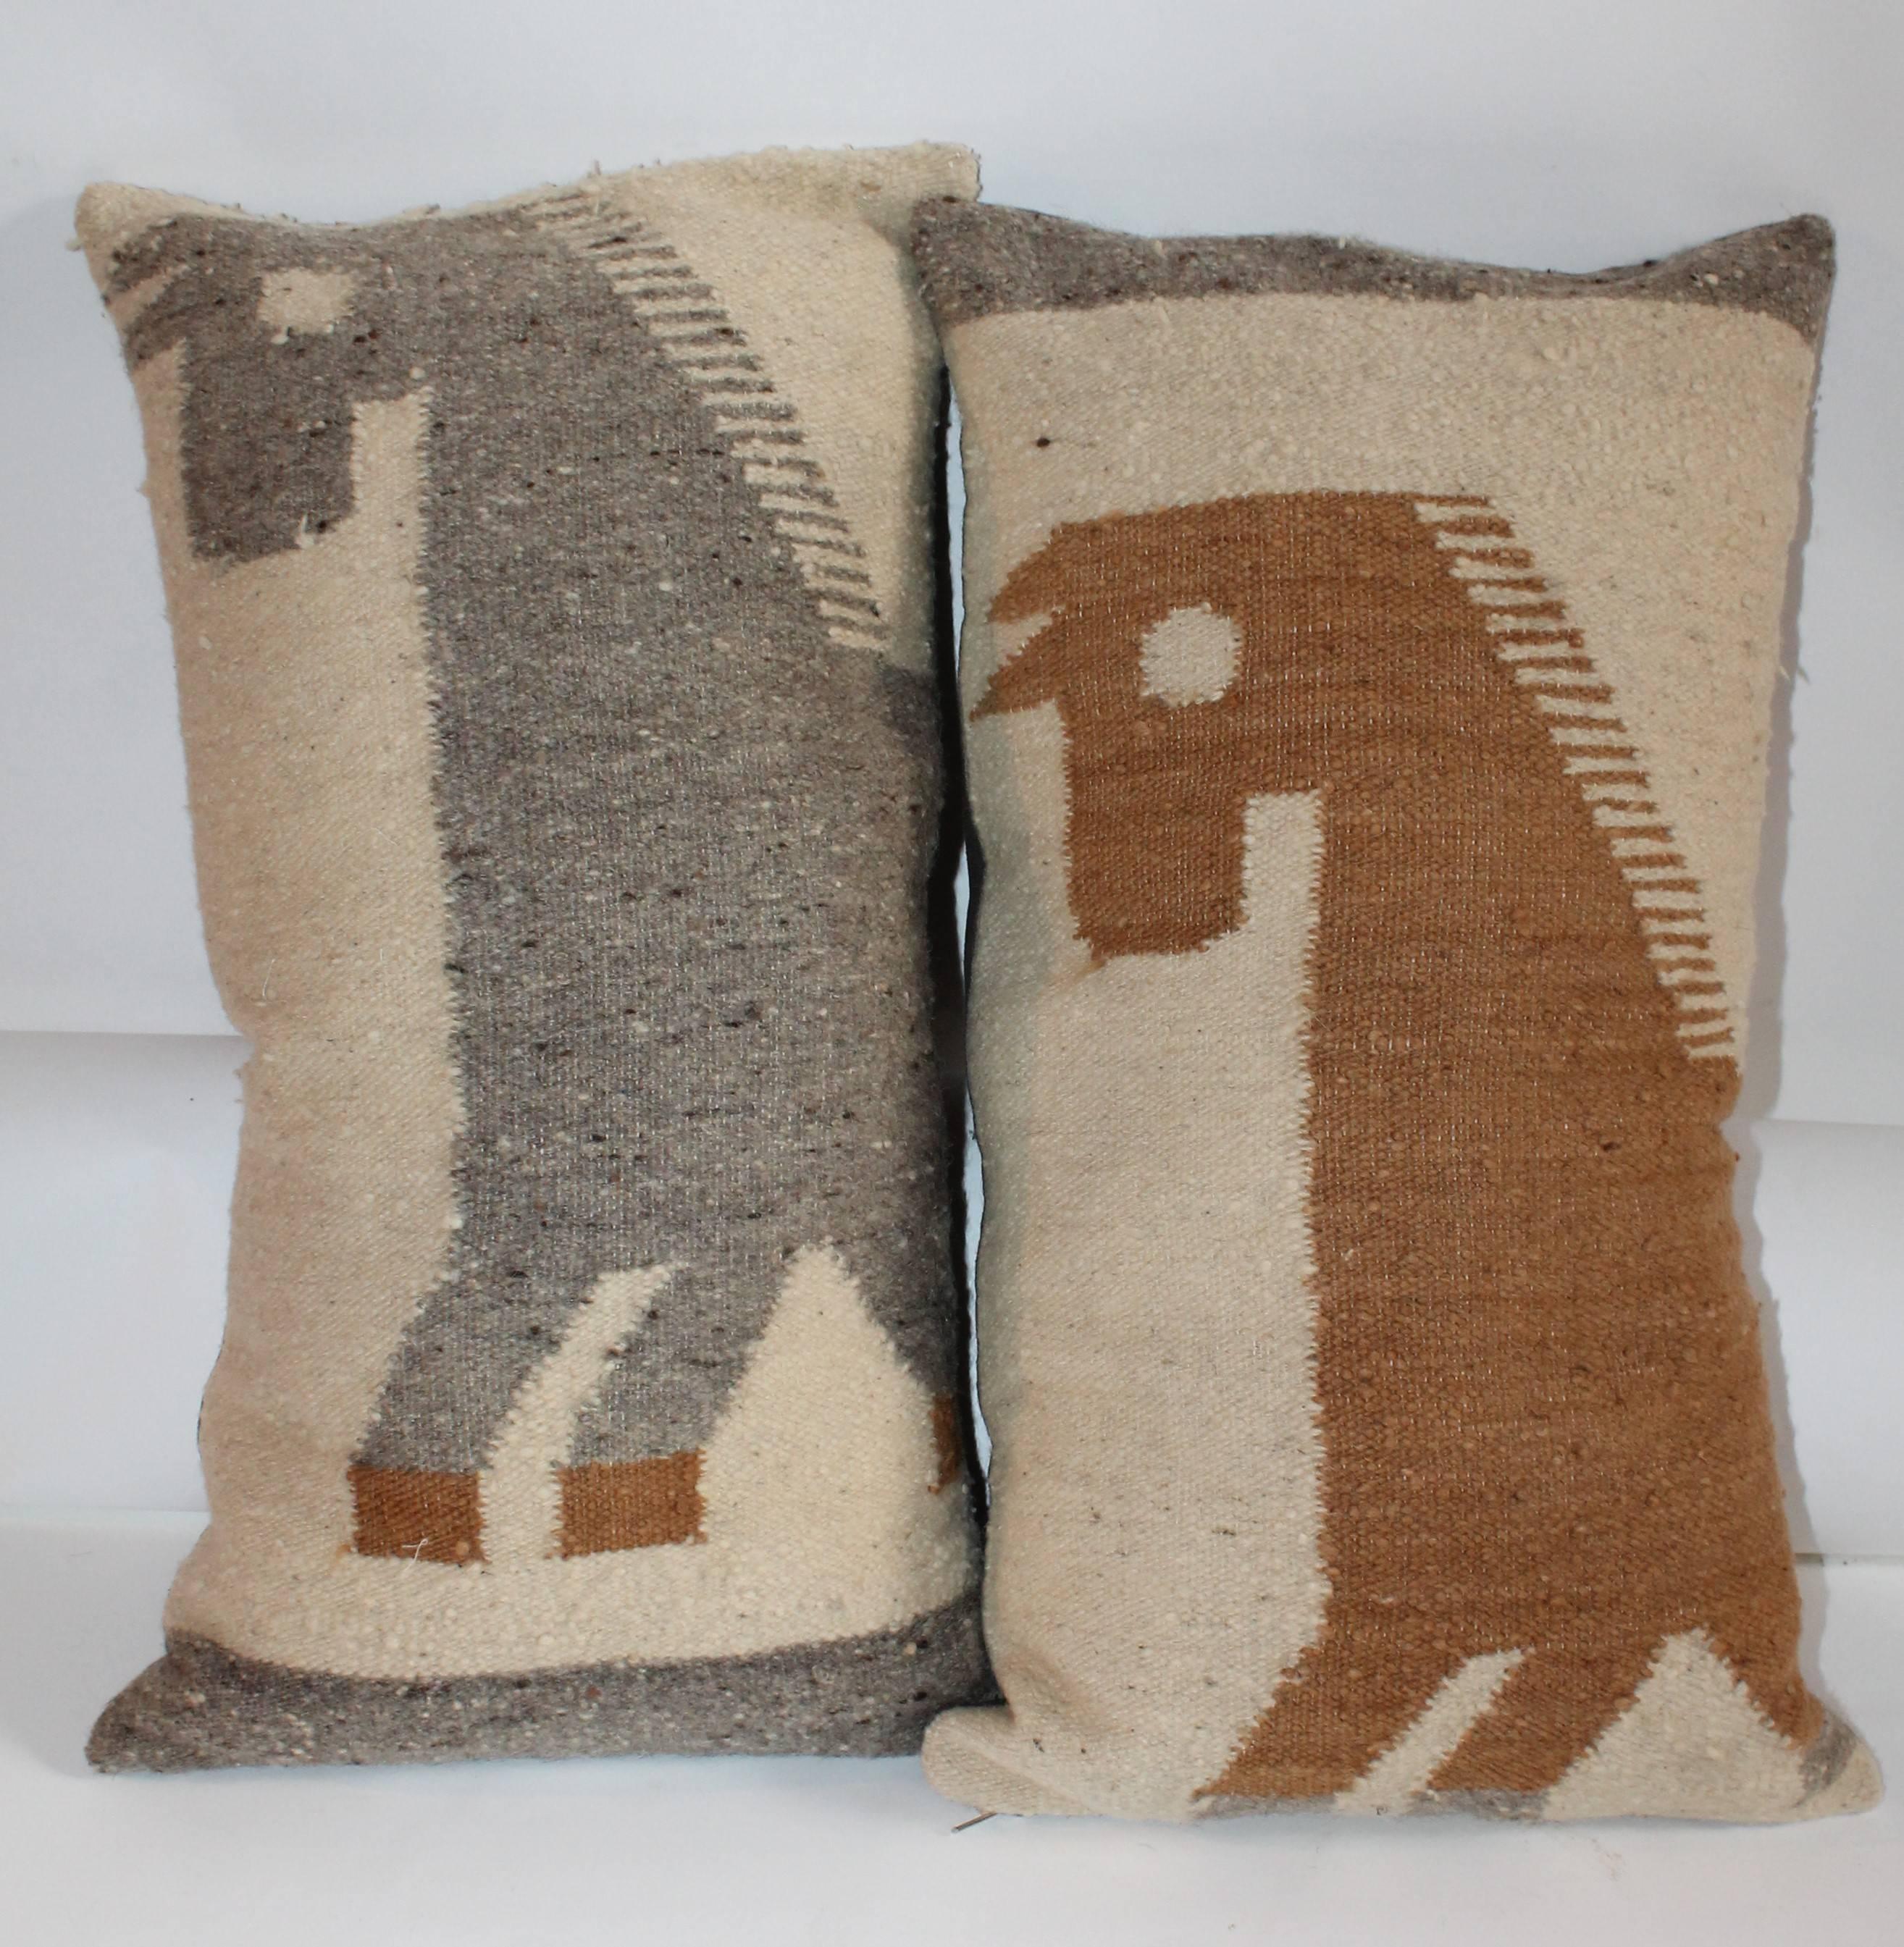 These handwoven horse weaving's pillows are in great condition and have taupe linen backings. The inserts are down and feather fill. Sold as a pair.